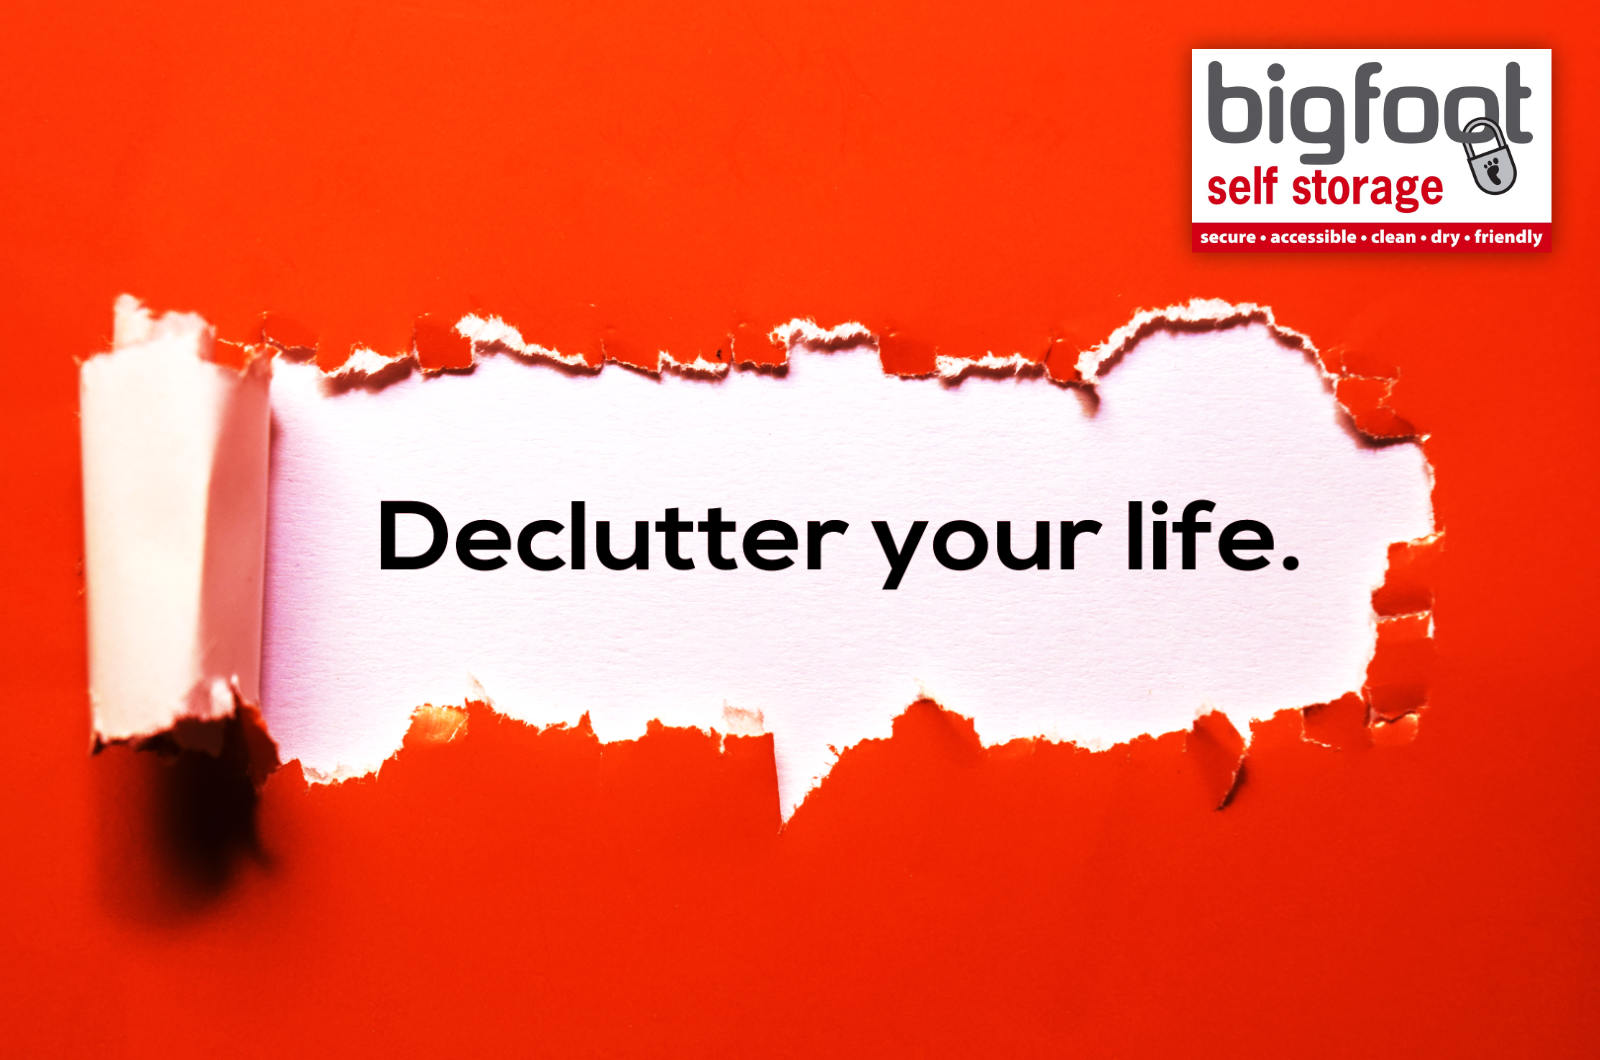 Self storage tips to declutter your home